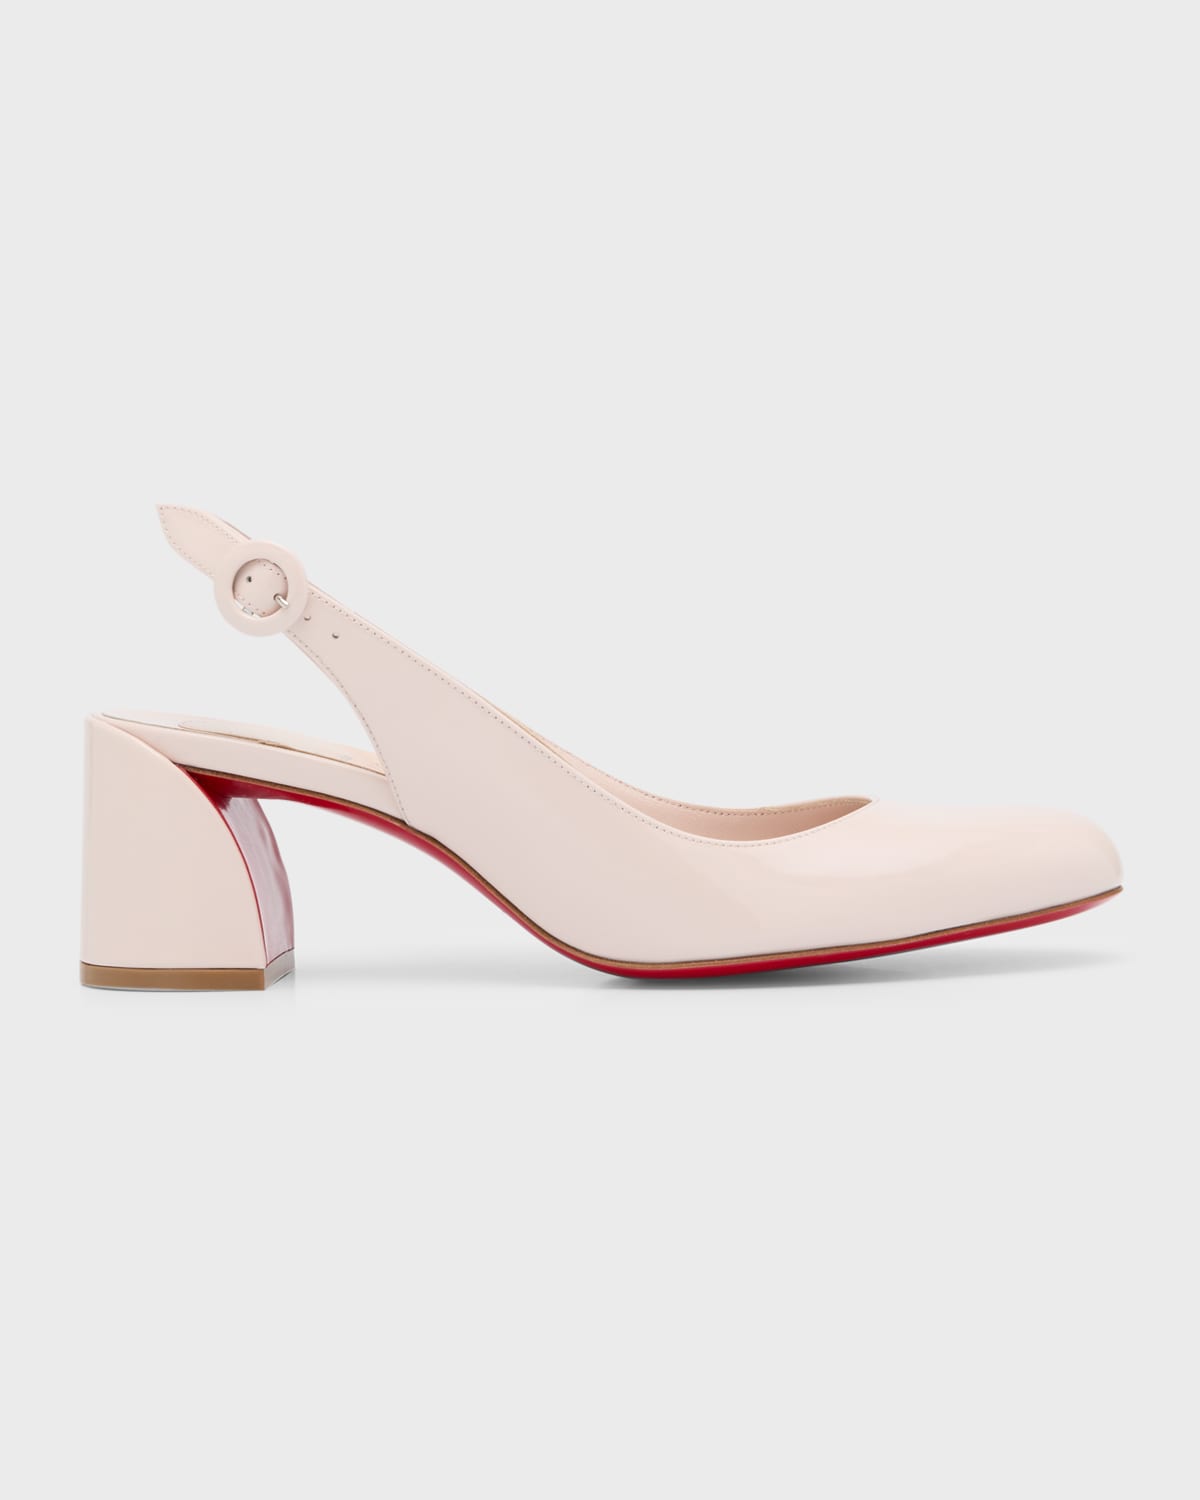 Shop Christian Louboutin So Jane Patent Red Sole Slingback Pumps In Leche